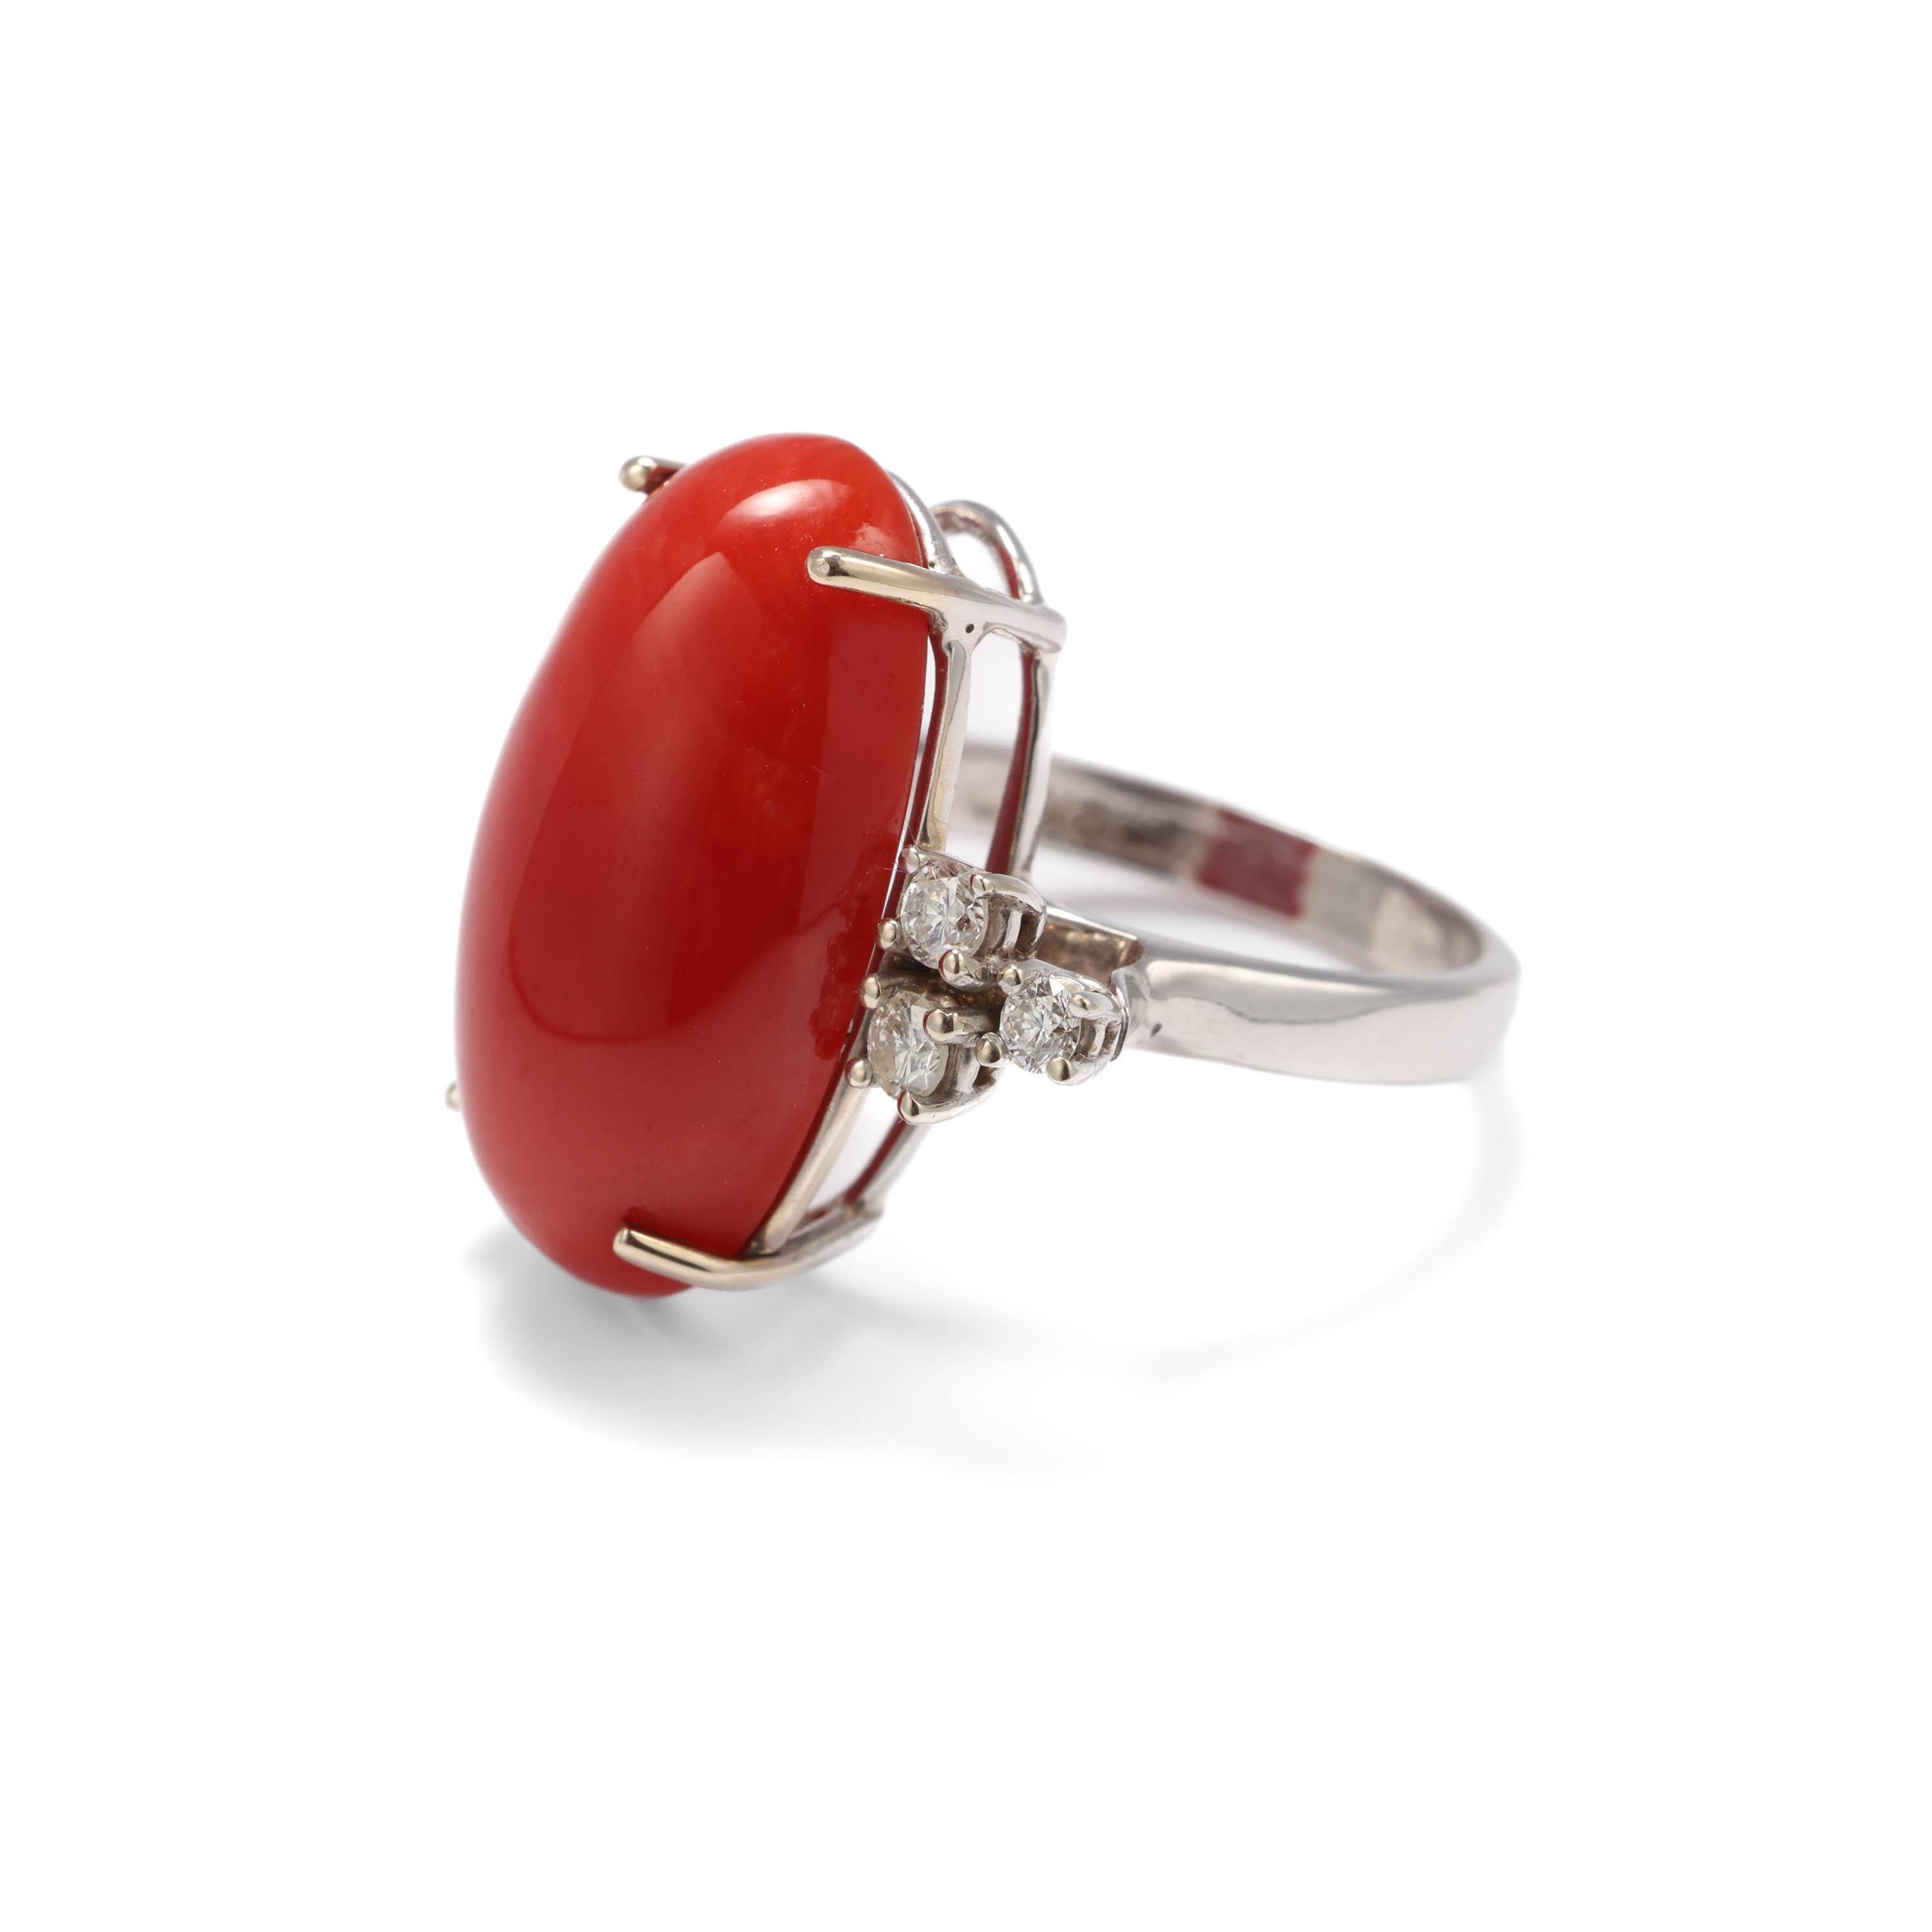 Coral Ring with Diamonds, Midcentury In Excellent Condition For Sale In Southbury, CT